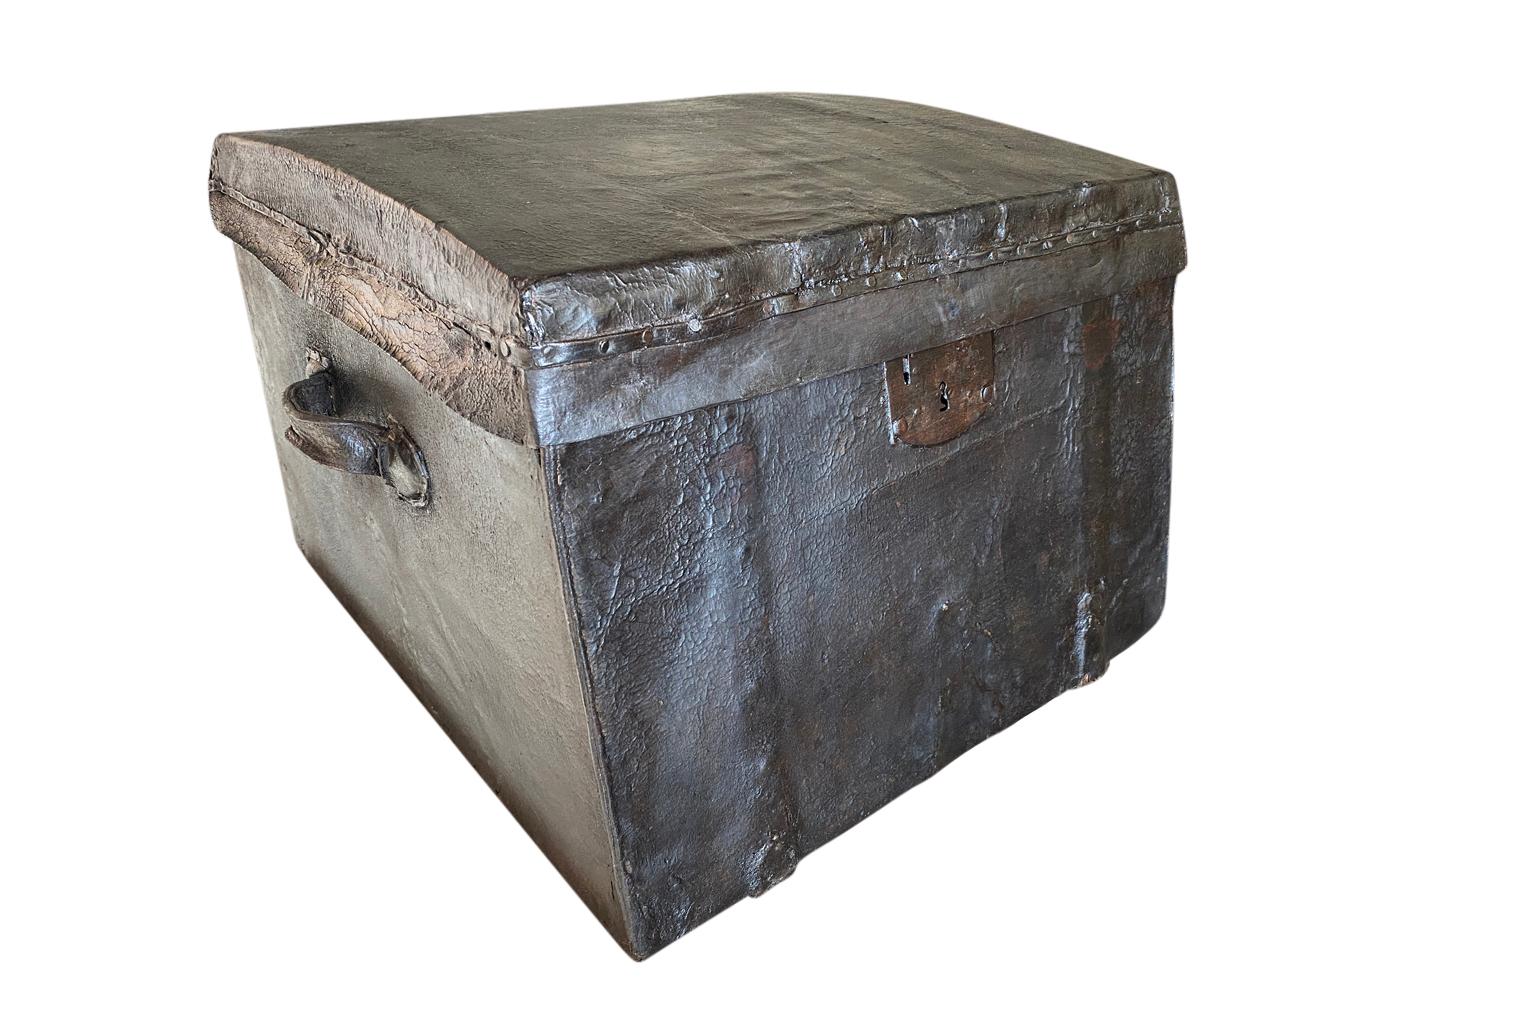 A wonderful mid-18th century leather clad trunk - coffee from the South of France. Fabulous patina.